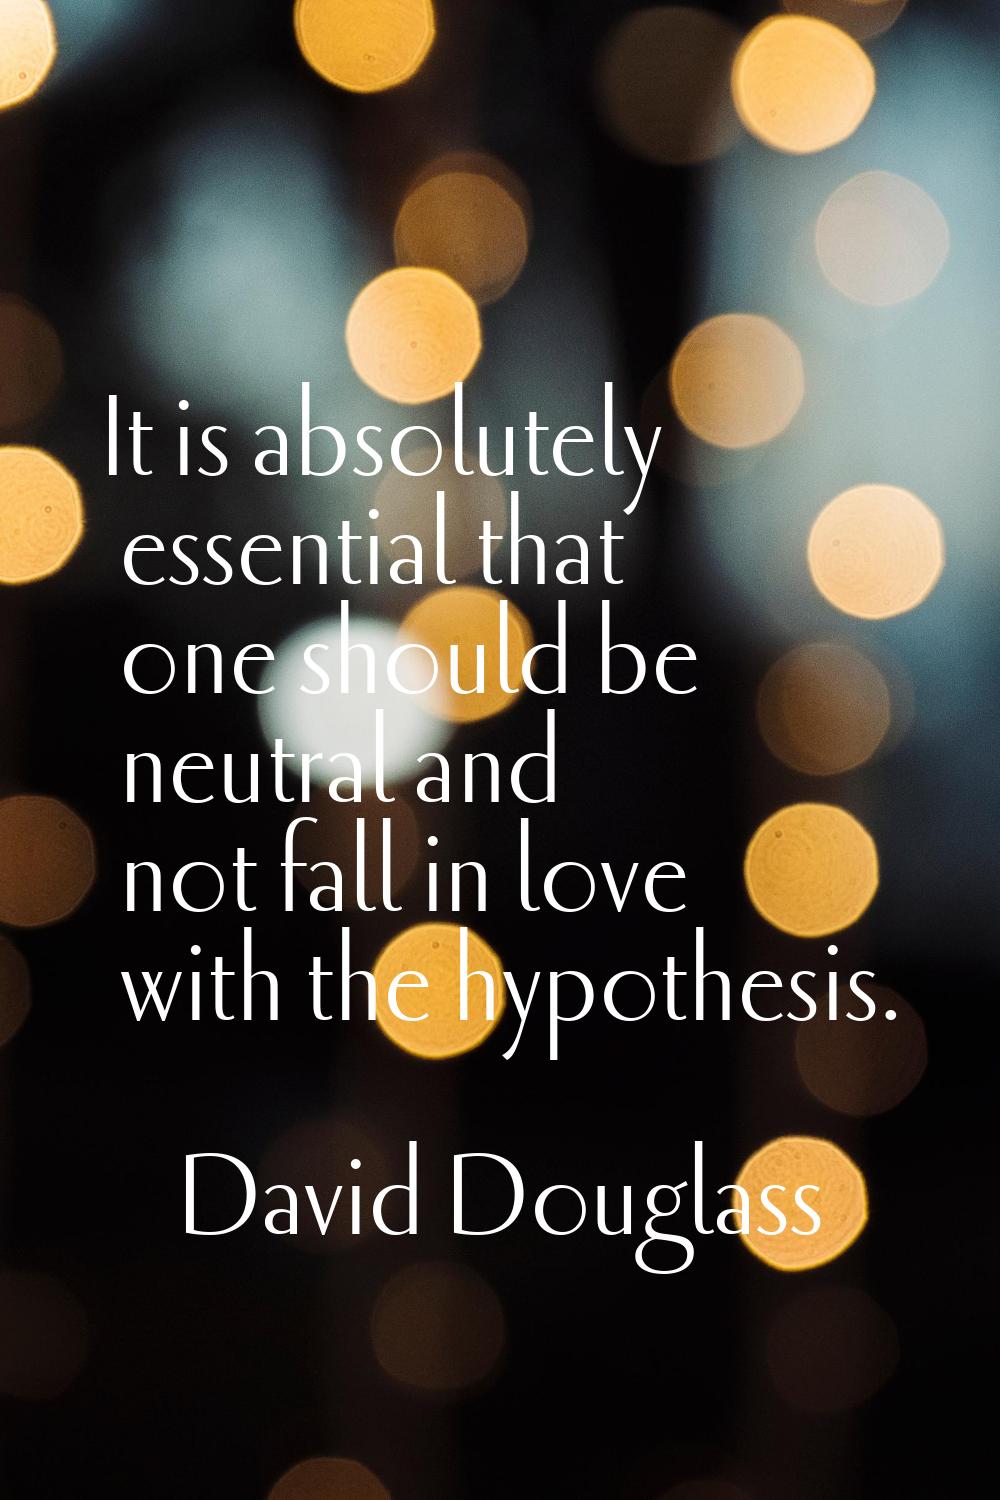 It is absolutely essential that one should be neutral and not fall in love with the hypothesis.